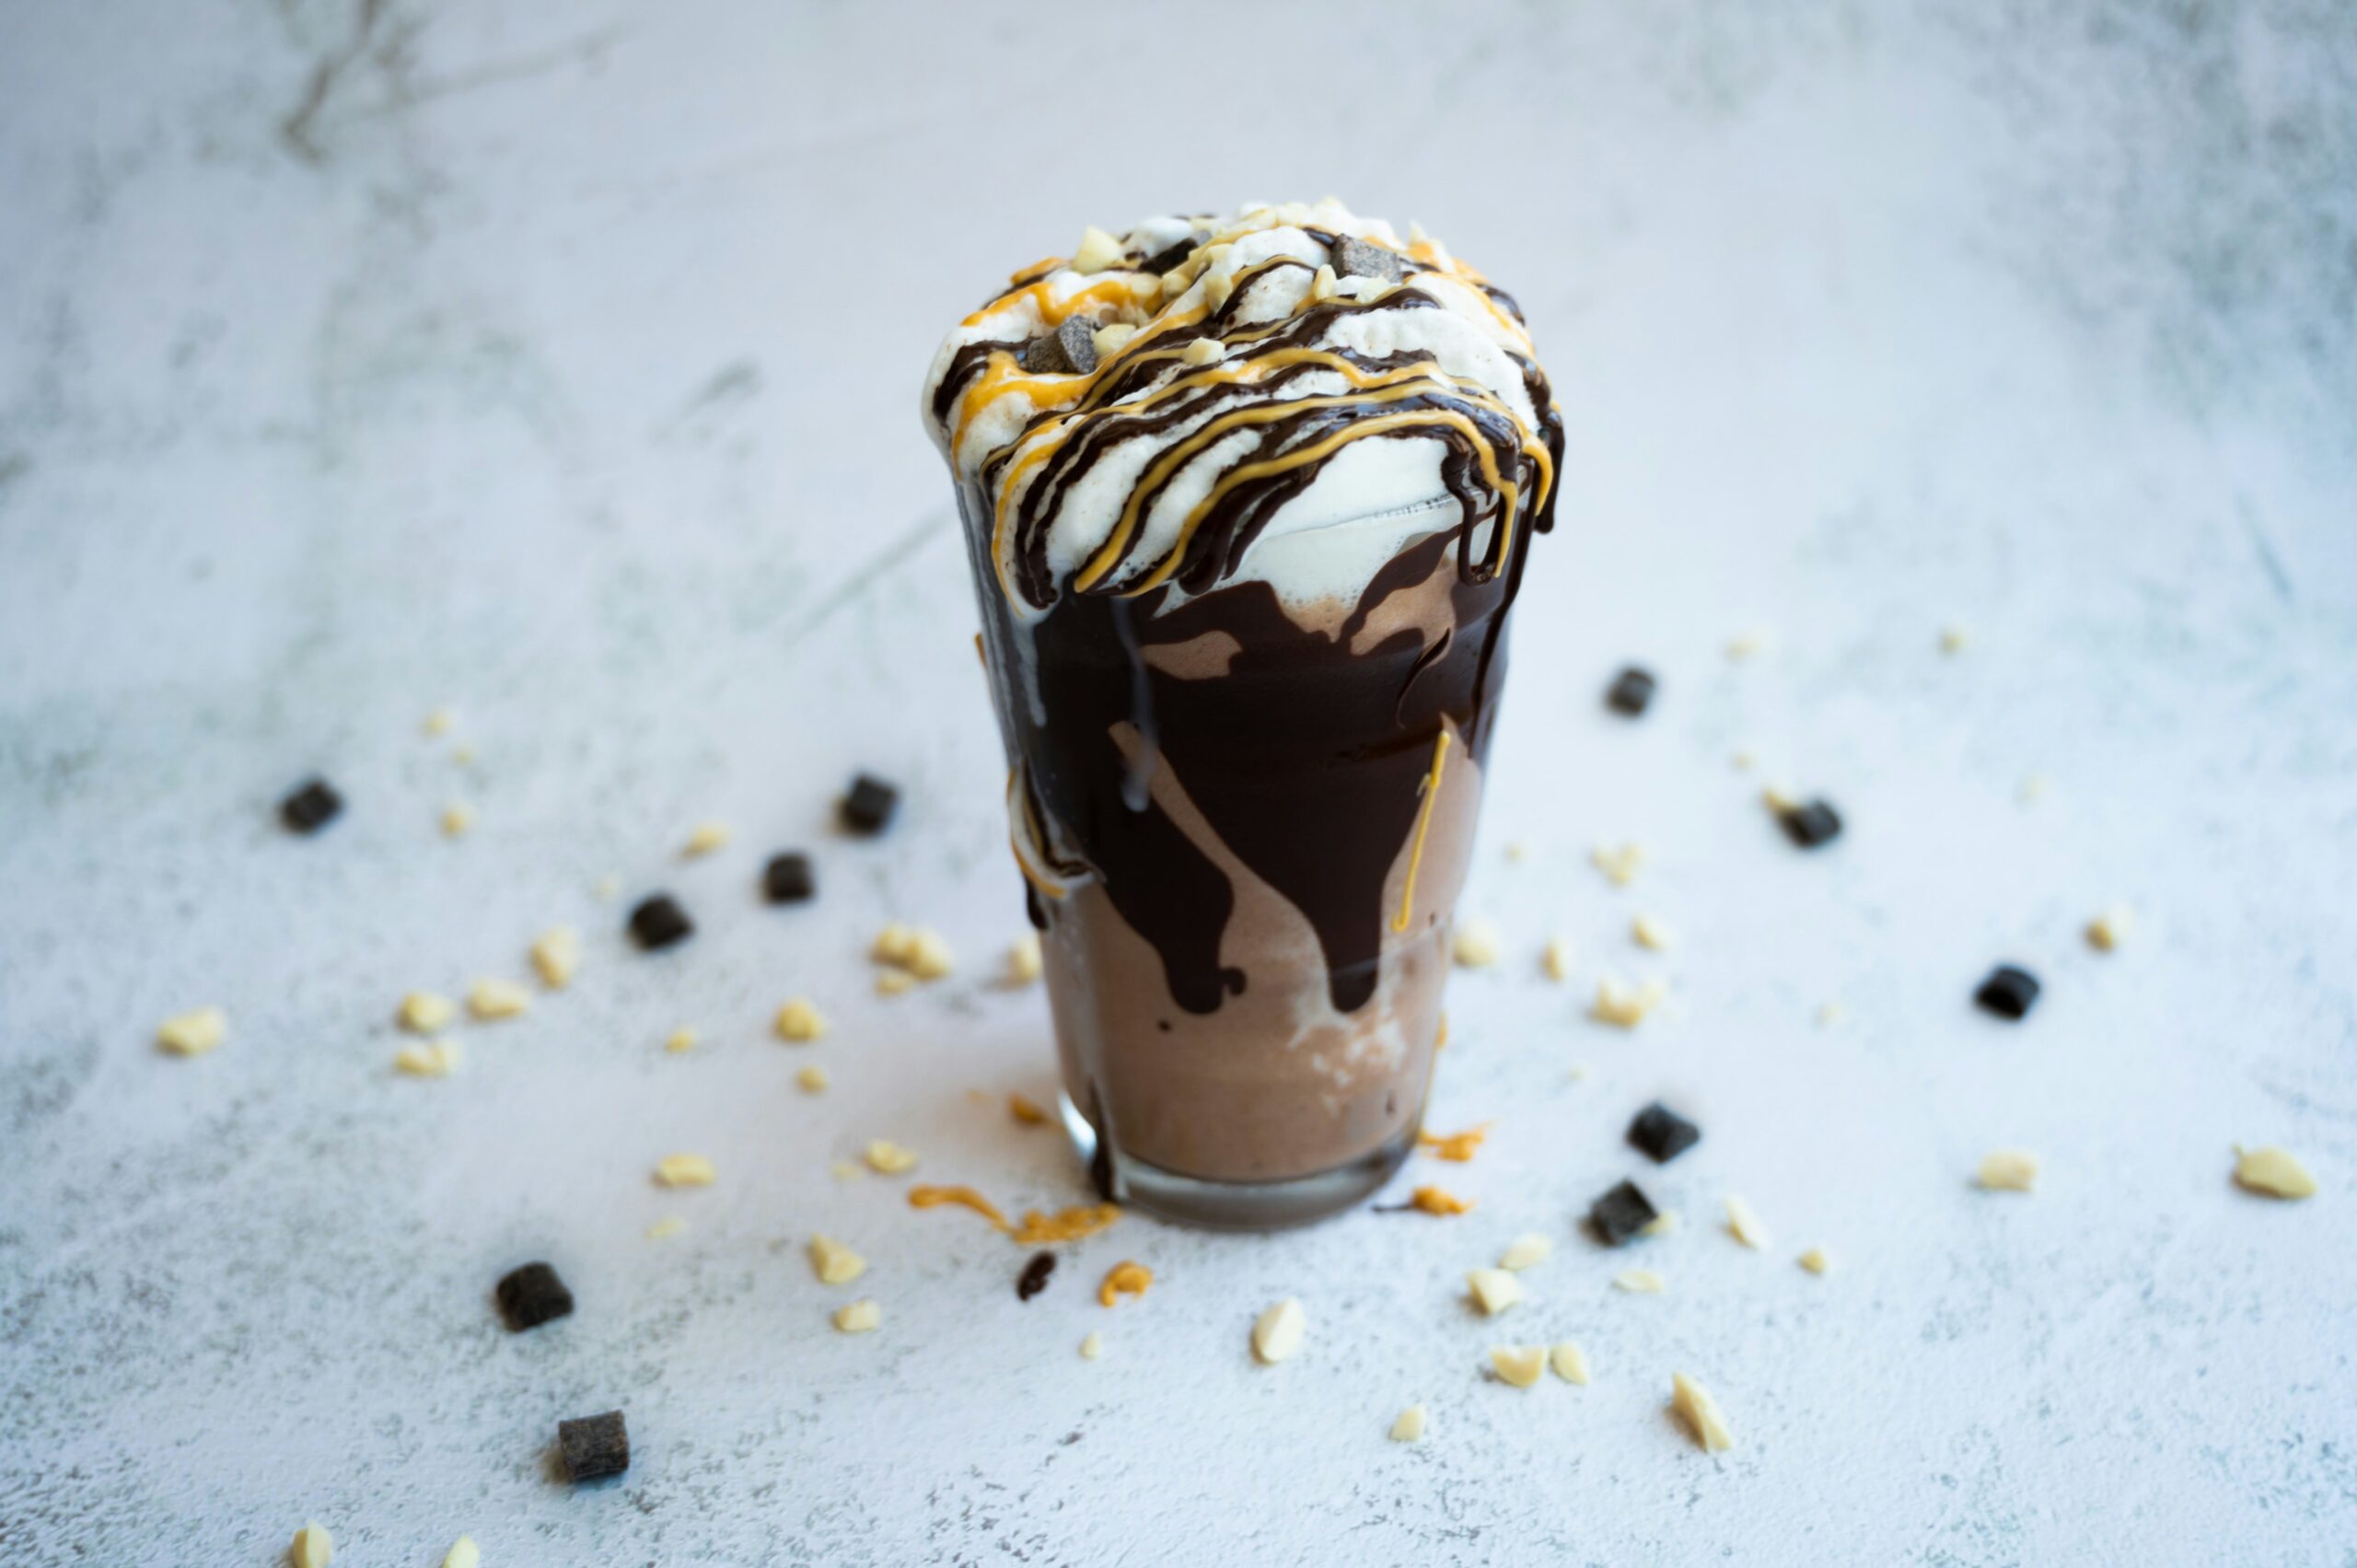 Replace this Nespresso recipe for the decadent and rich S'mores dessert. Pictured: A latte